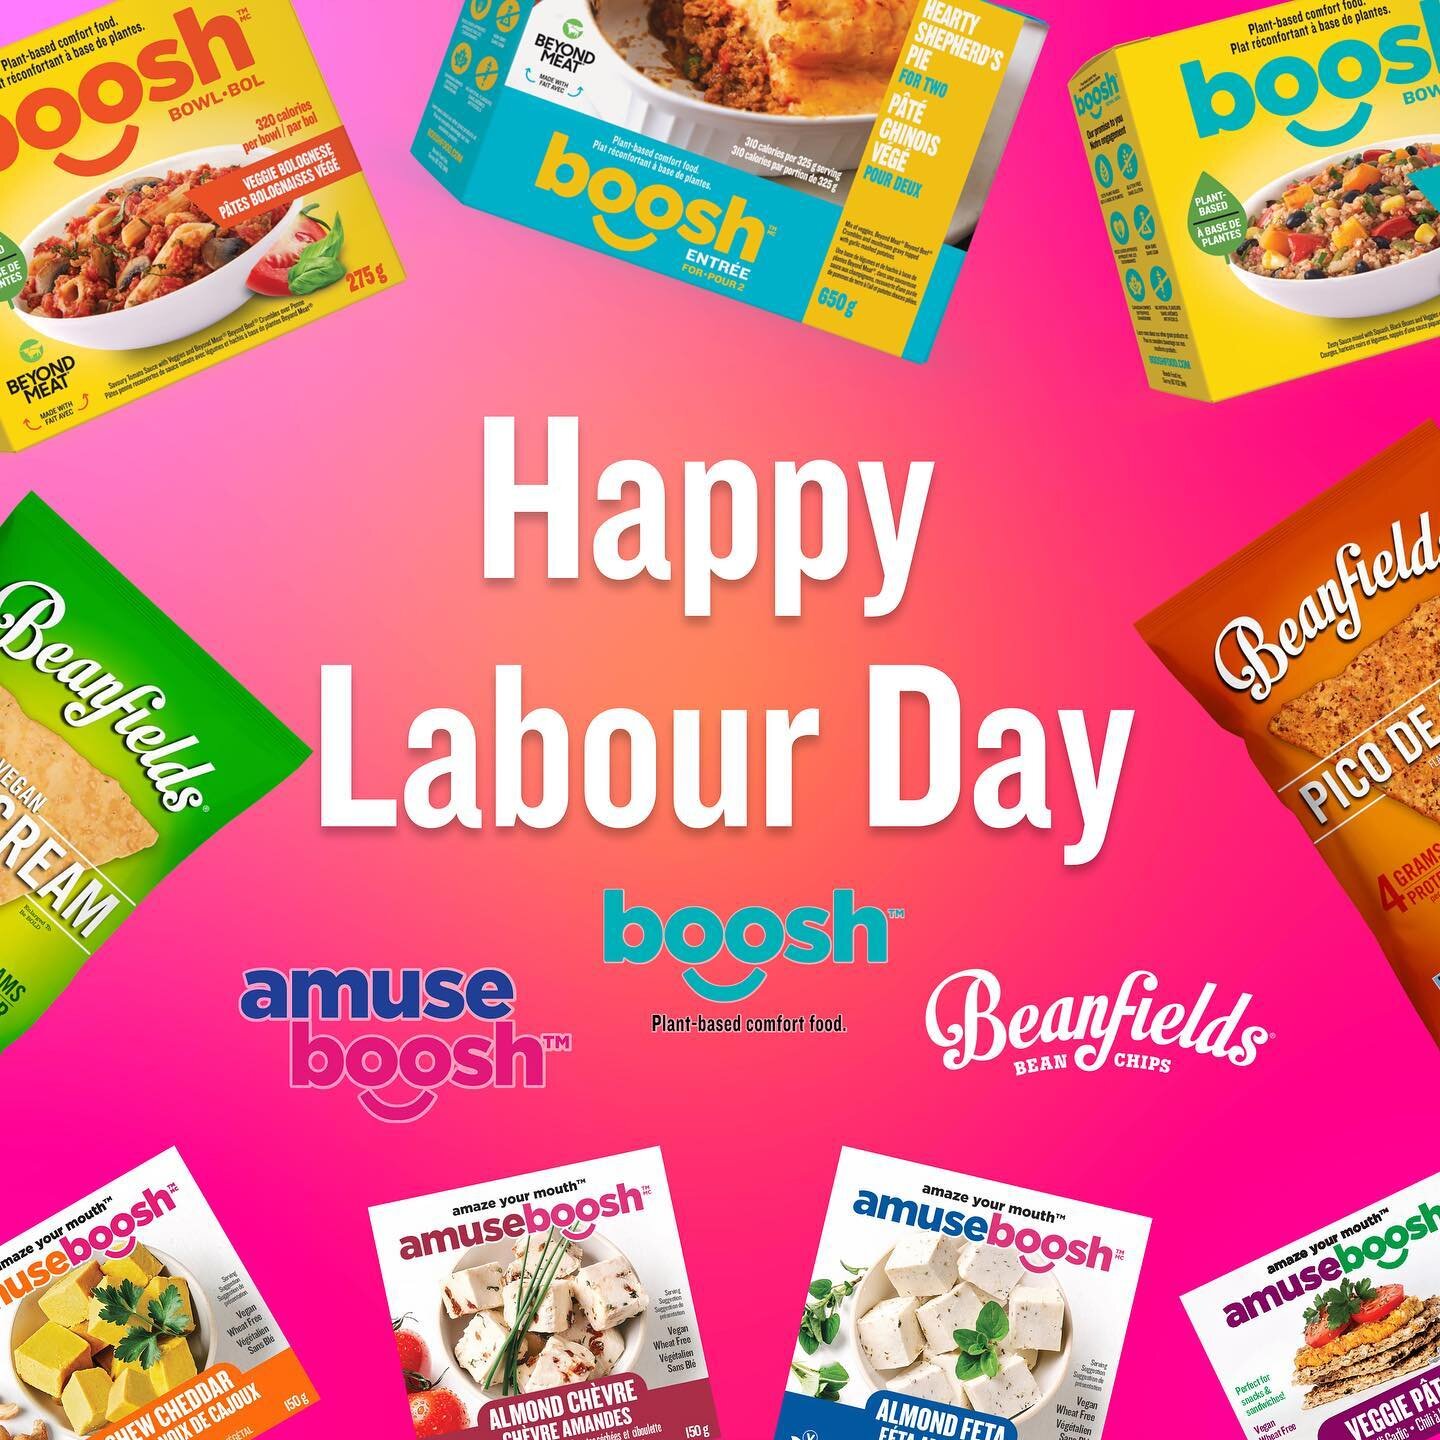 Happy Labour Day from our Boosh family to yours ✨

We hope you are having a wonderful and relaxing long weekend ❤️